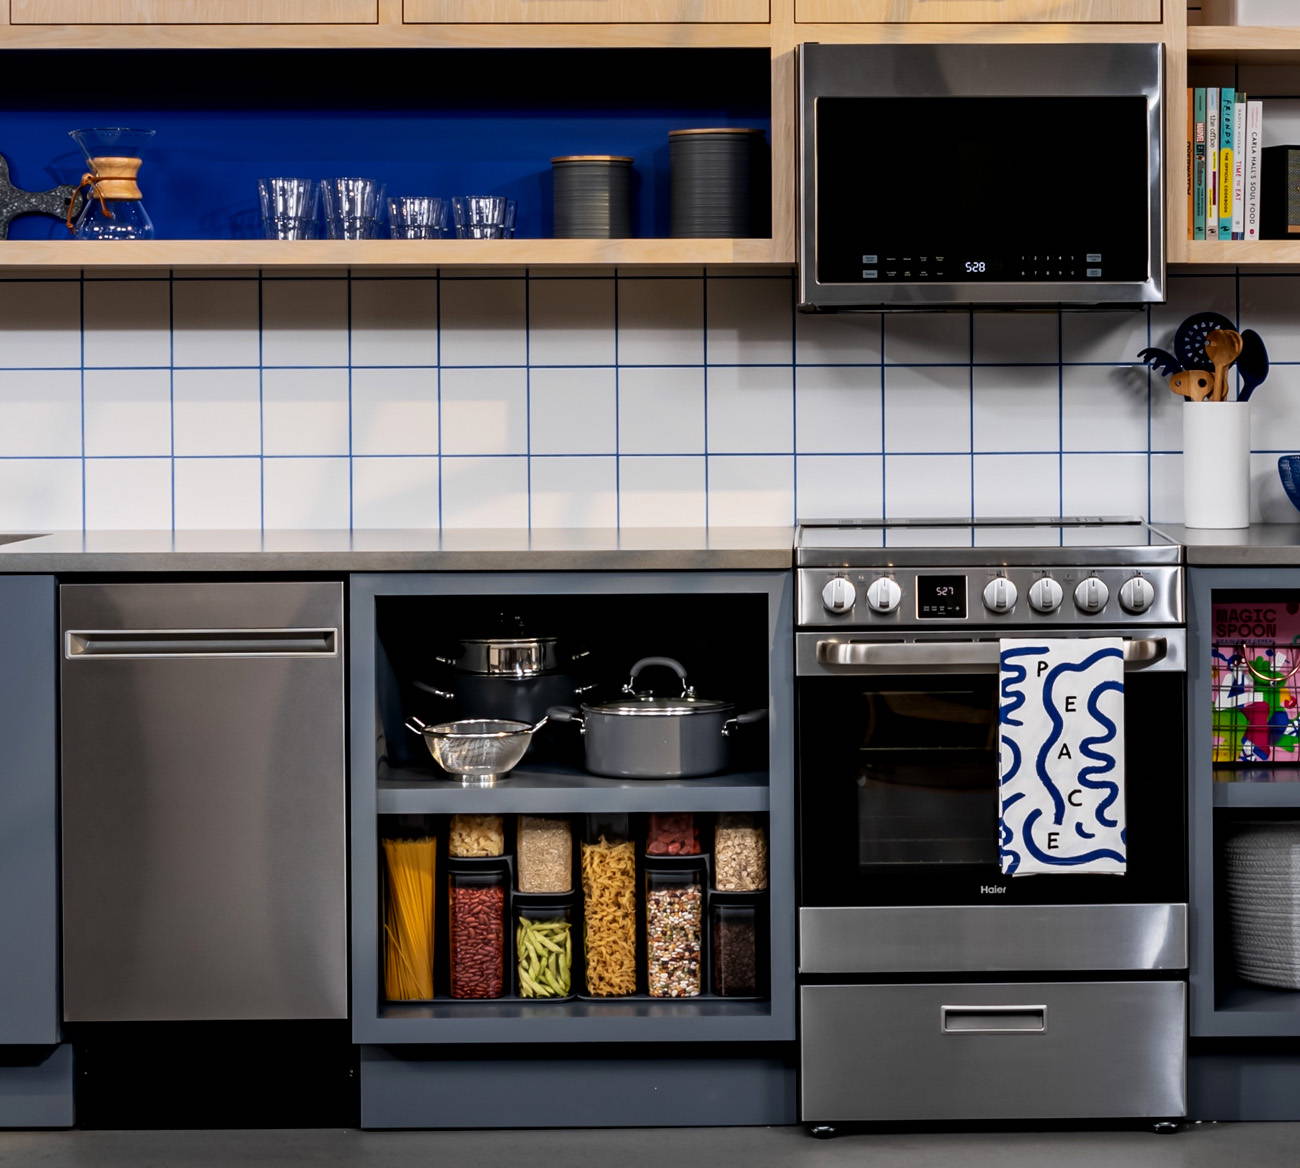 Haier small space appliances in a modern kitchen